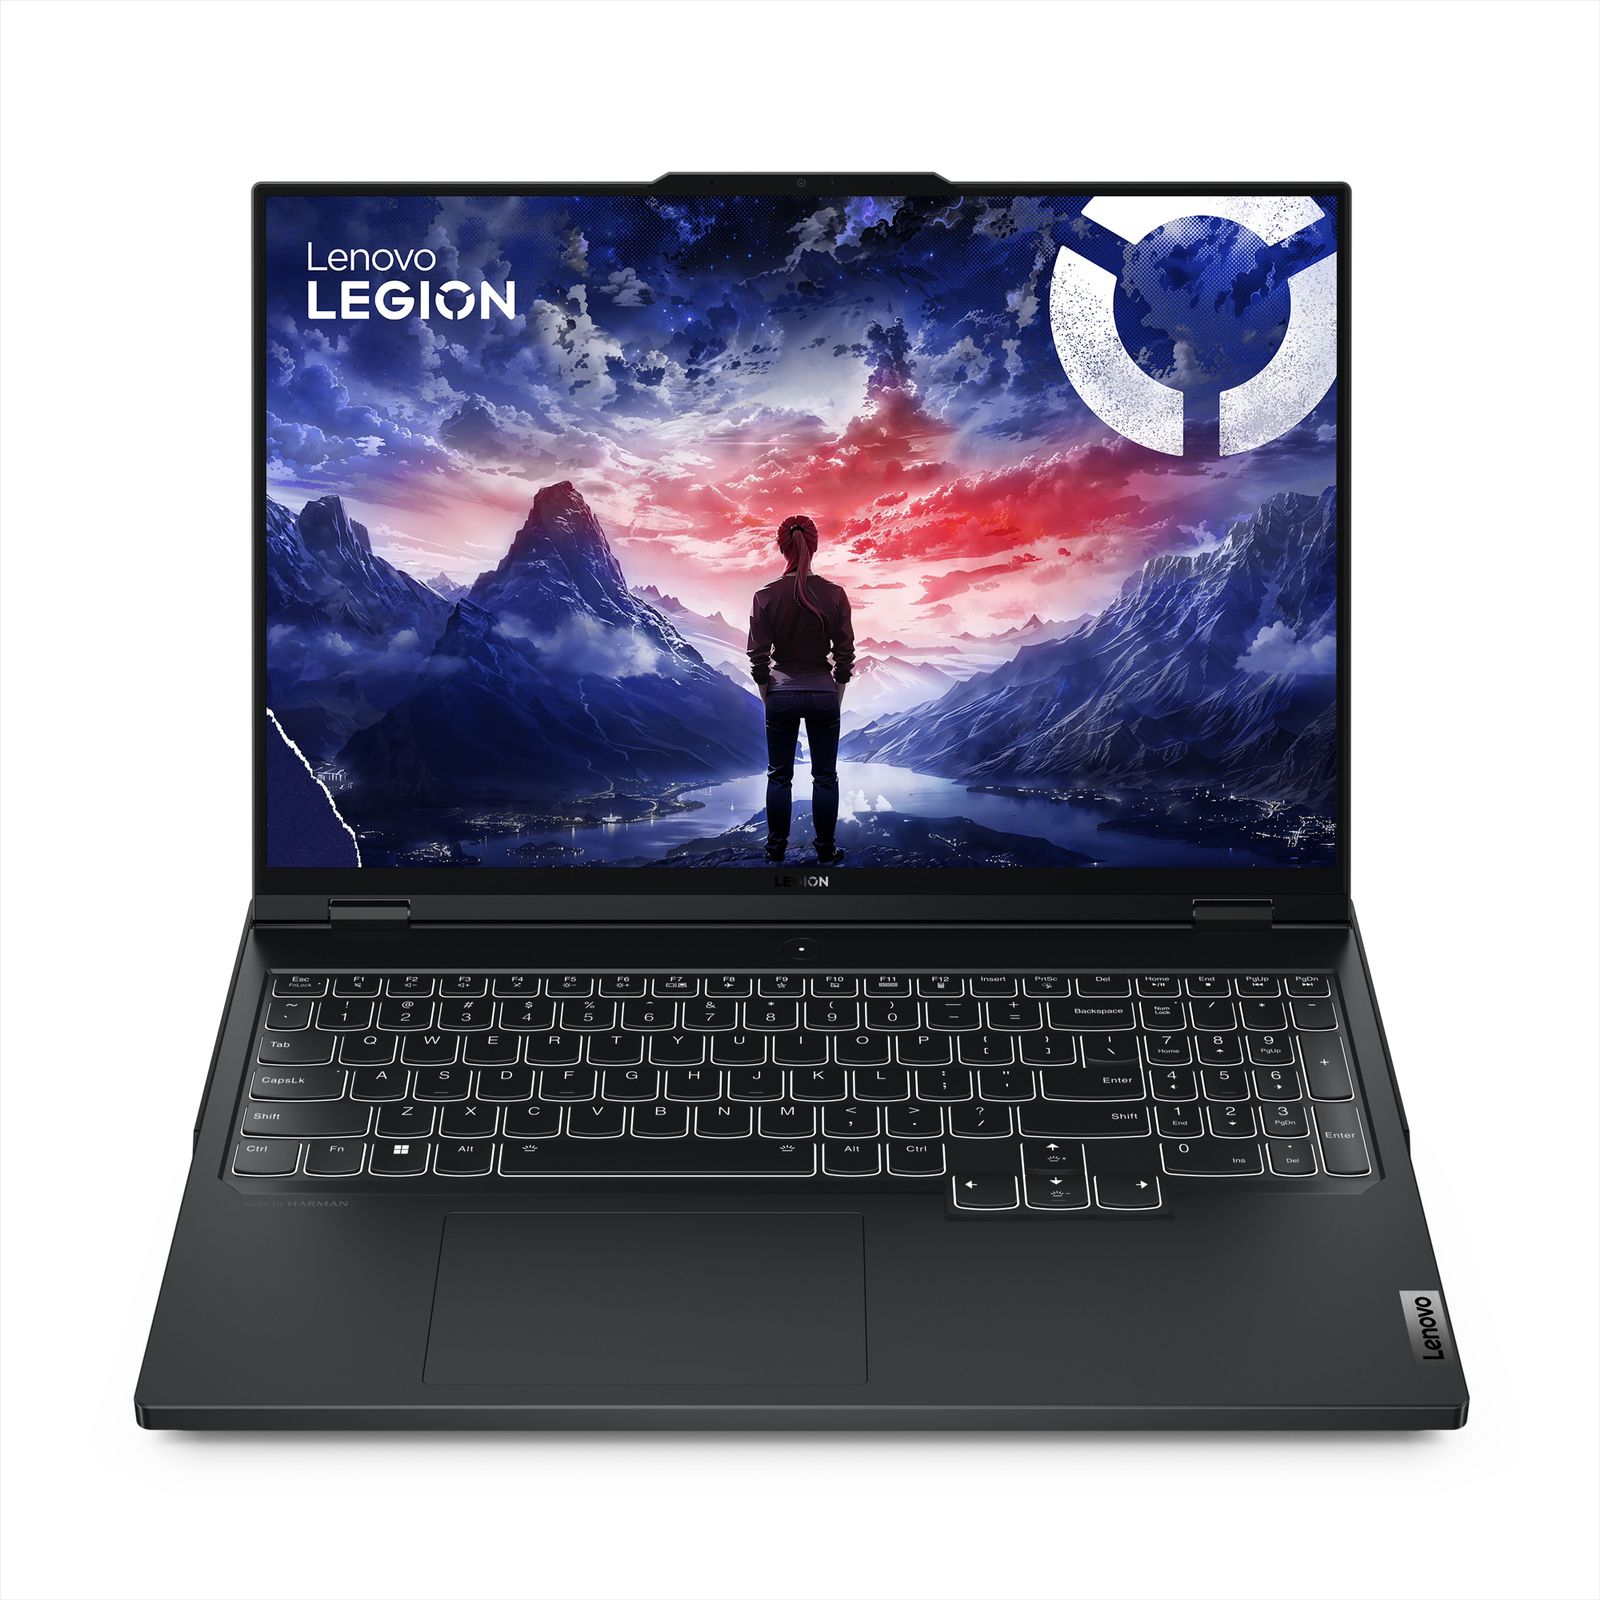 Lenovo has launched four new Legion gaming laptops in India